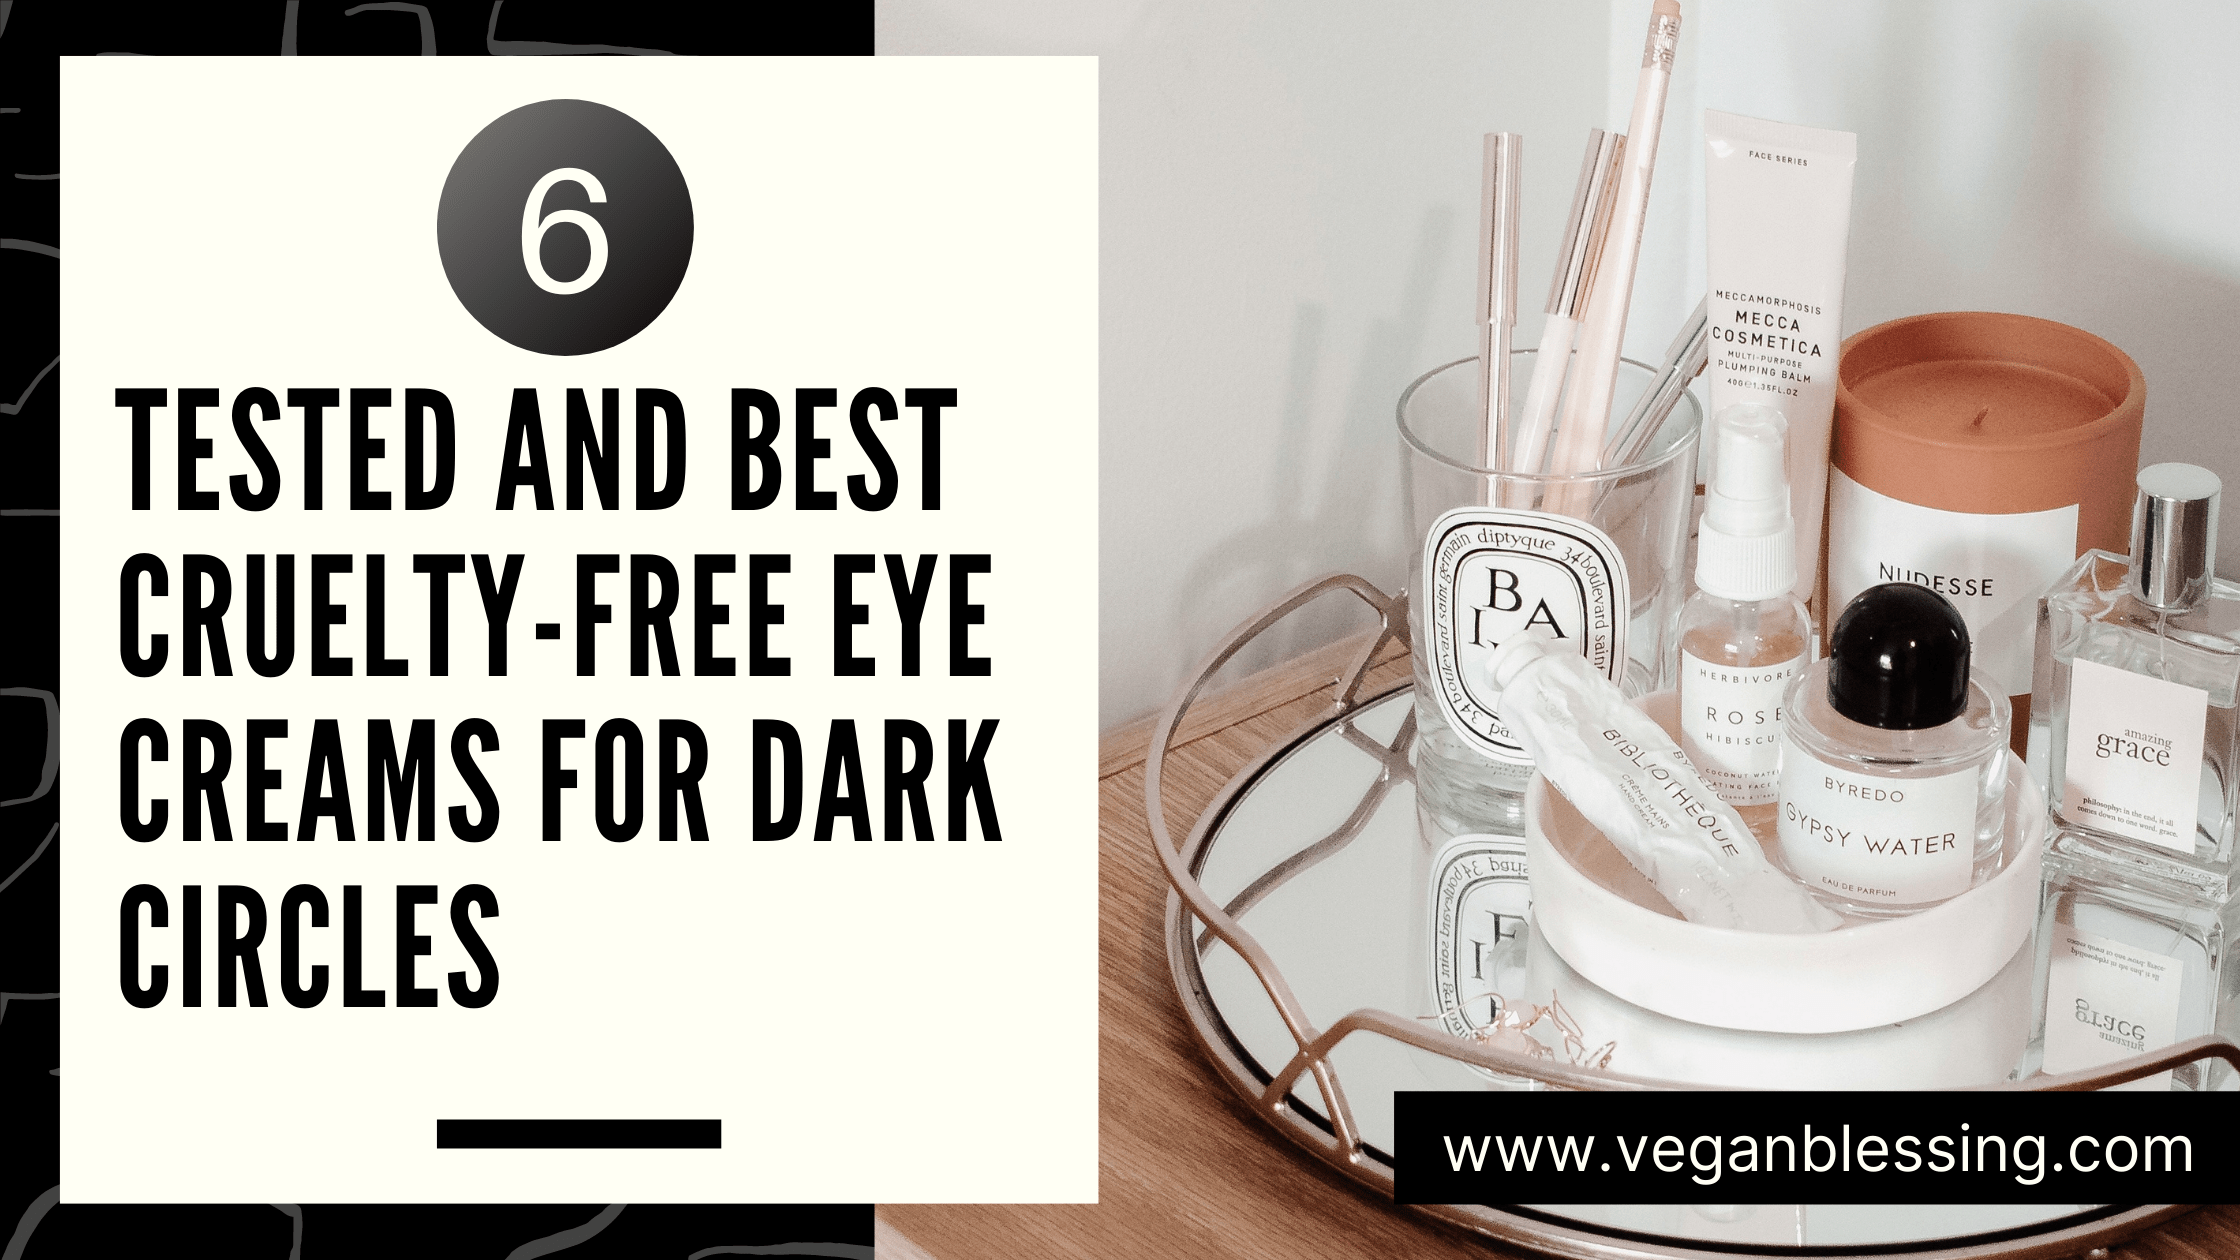 6 Tested and Best Cruelty-Free Eye Creams for Dark Circles